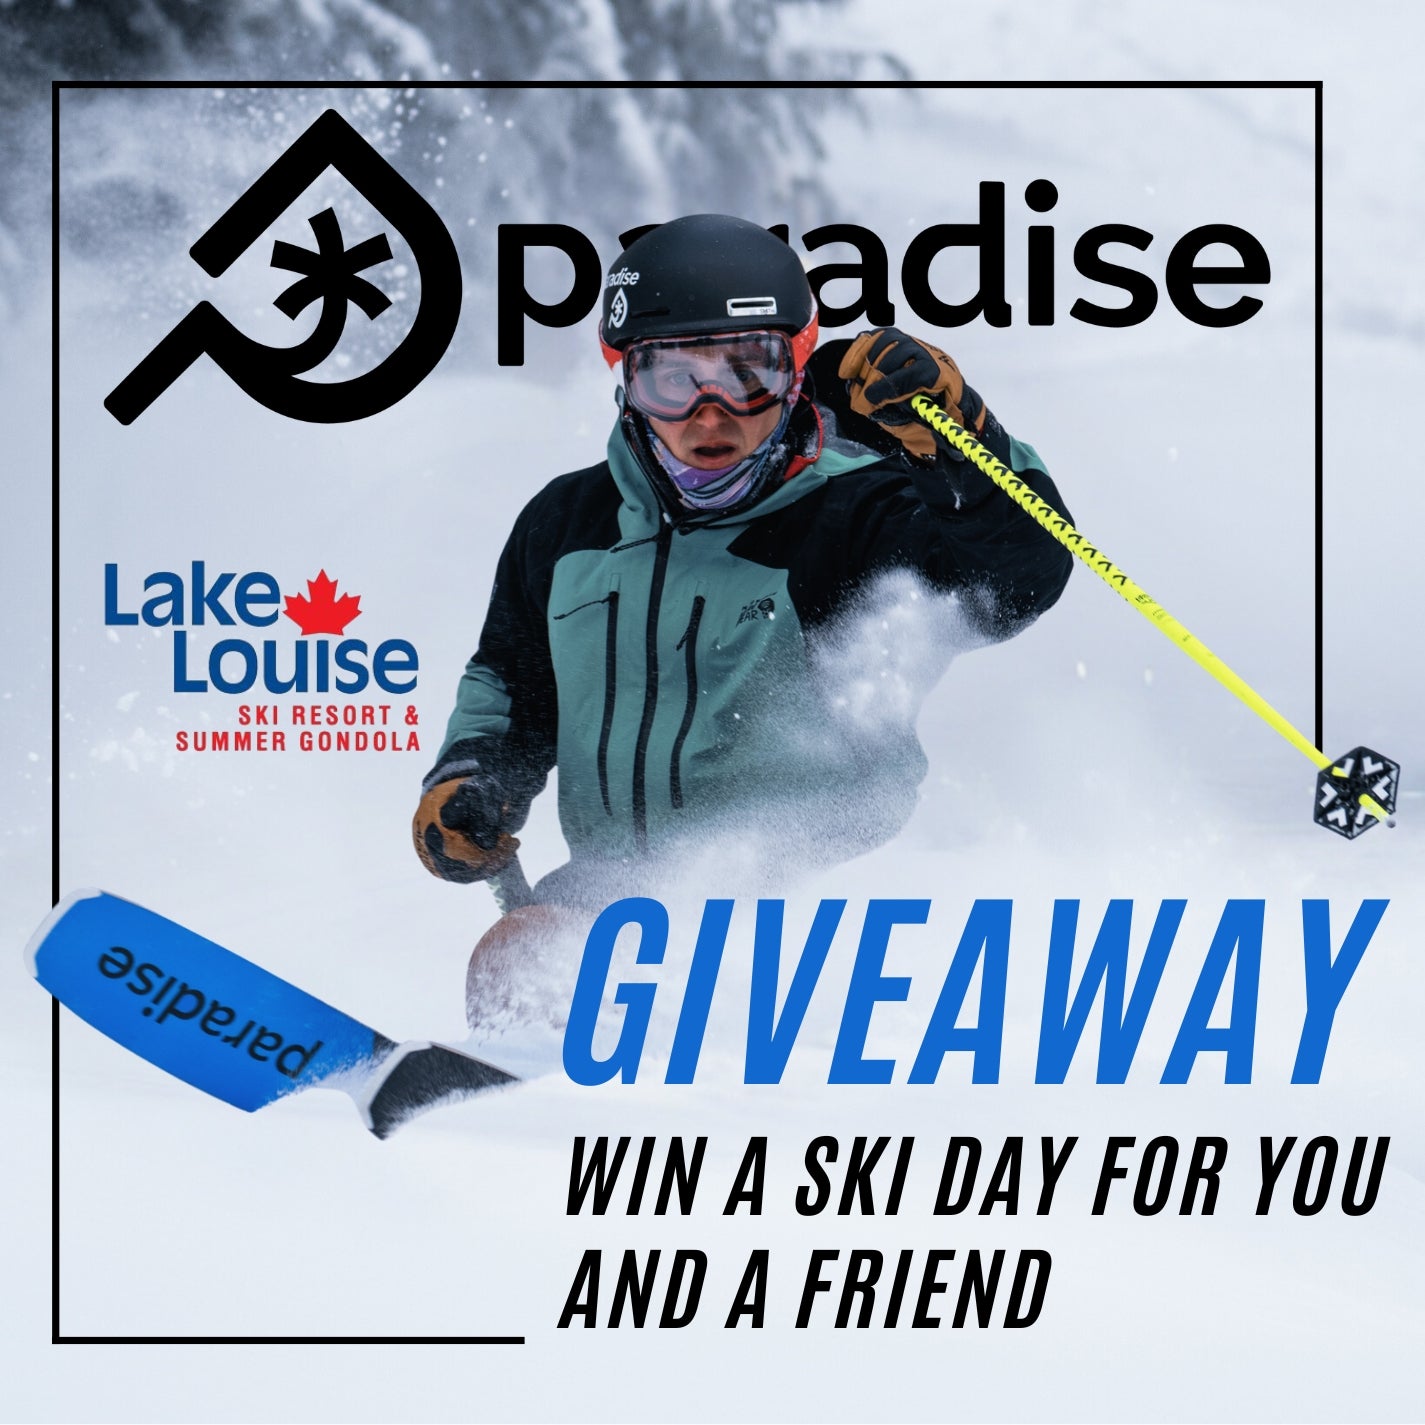 ENTER THE PARADISE AND LAKE LOUISE GIVEAWAY